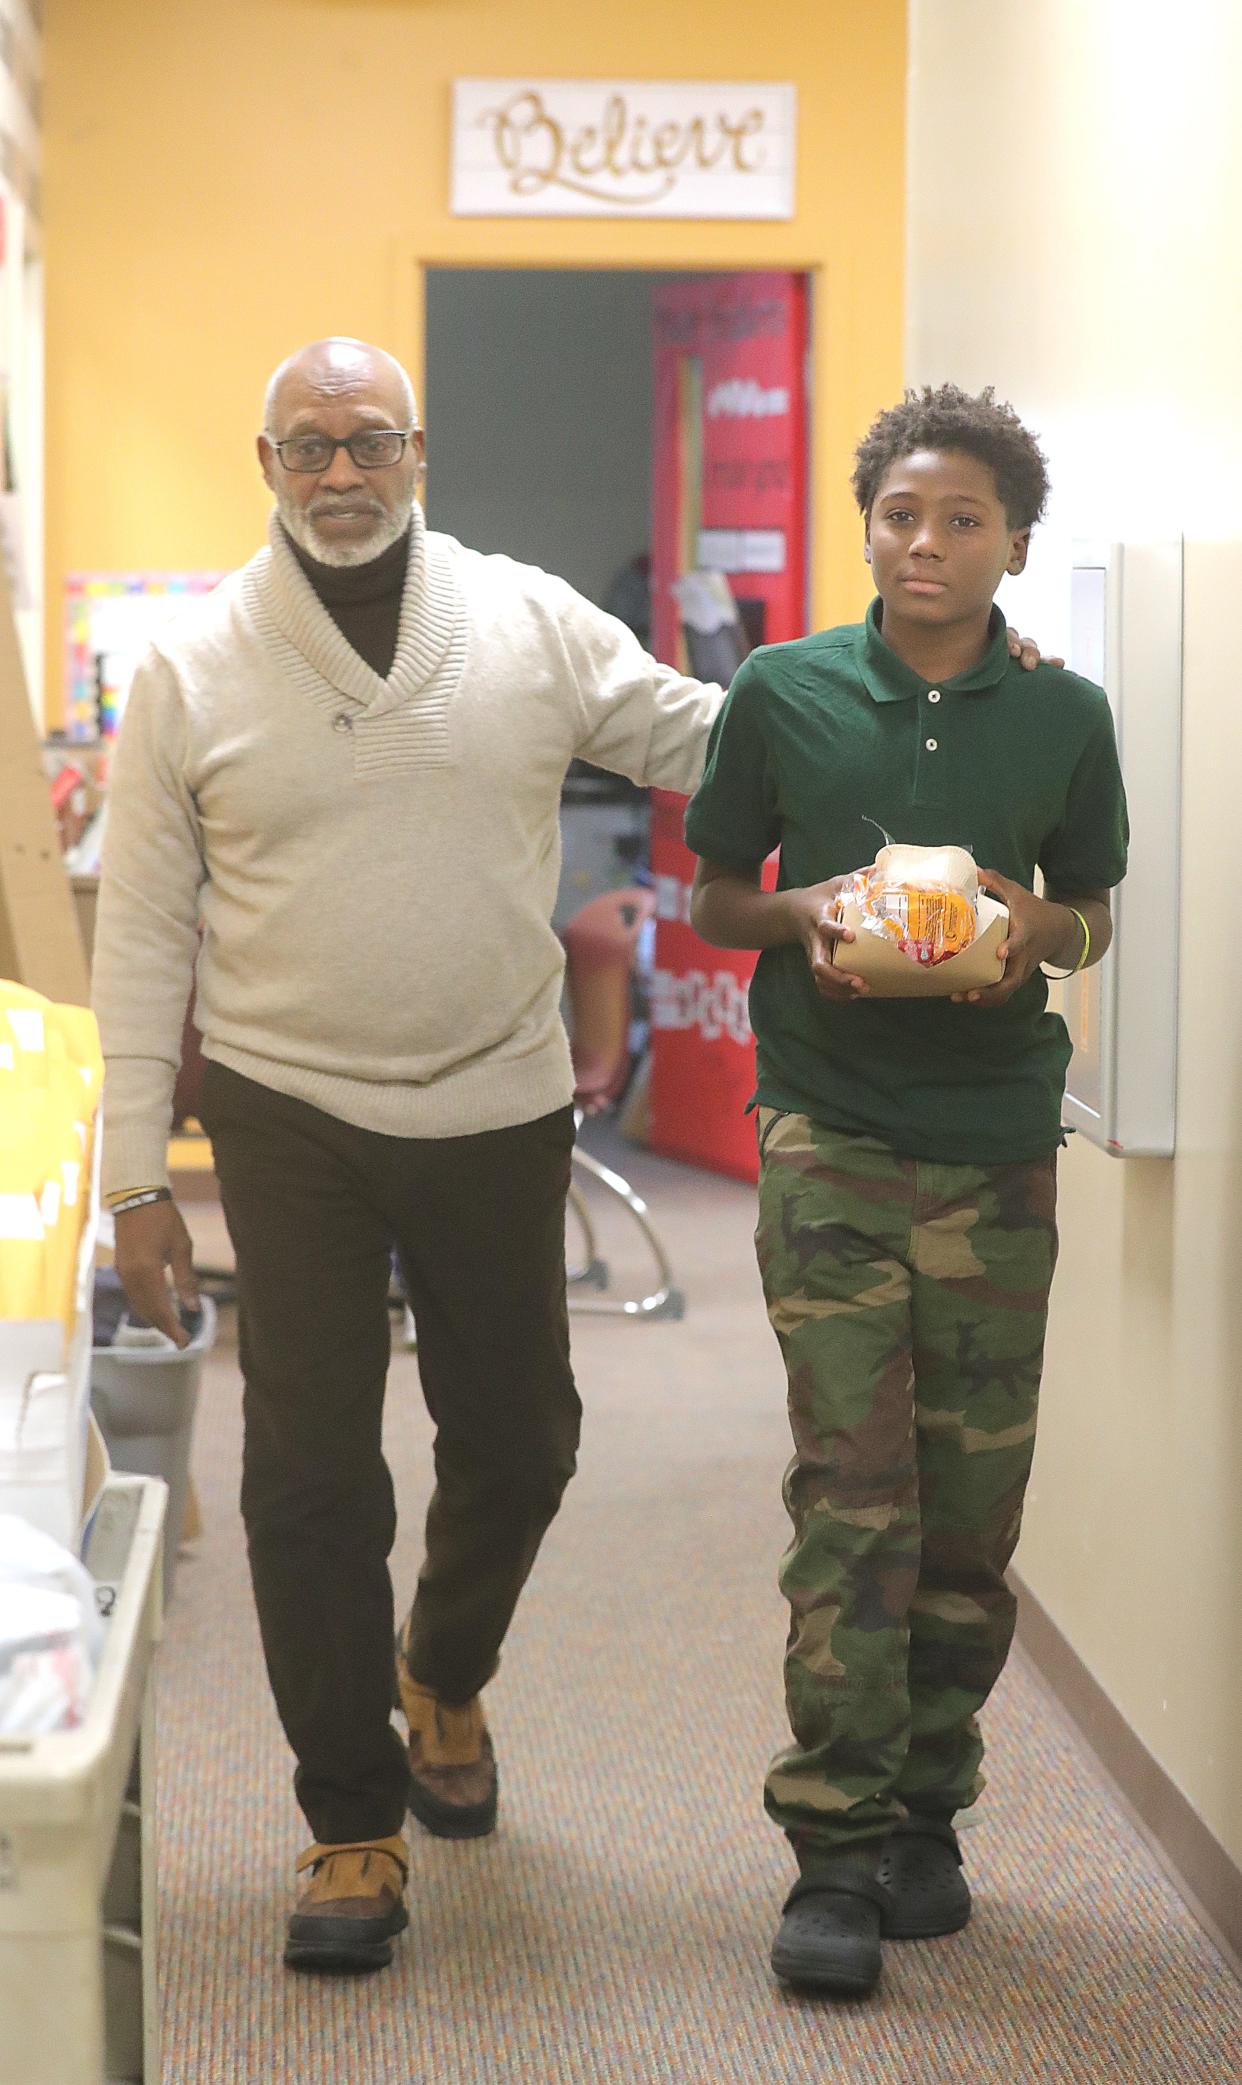 Michael Irby, a mentor with 100 Black Men of Akron Inc., walks with student Dexter Turker to a small group meeting Friday at Crouse Elementary School in Akron.